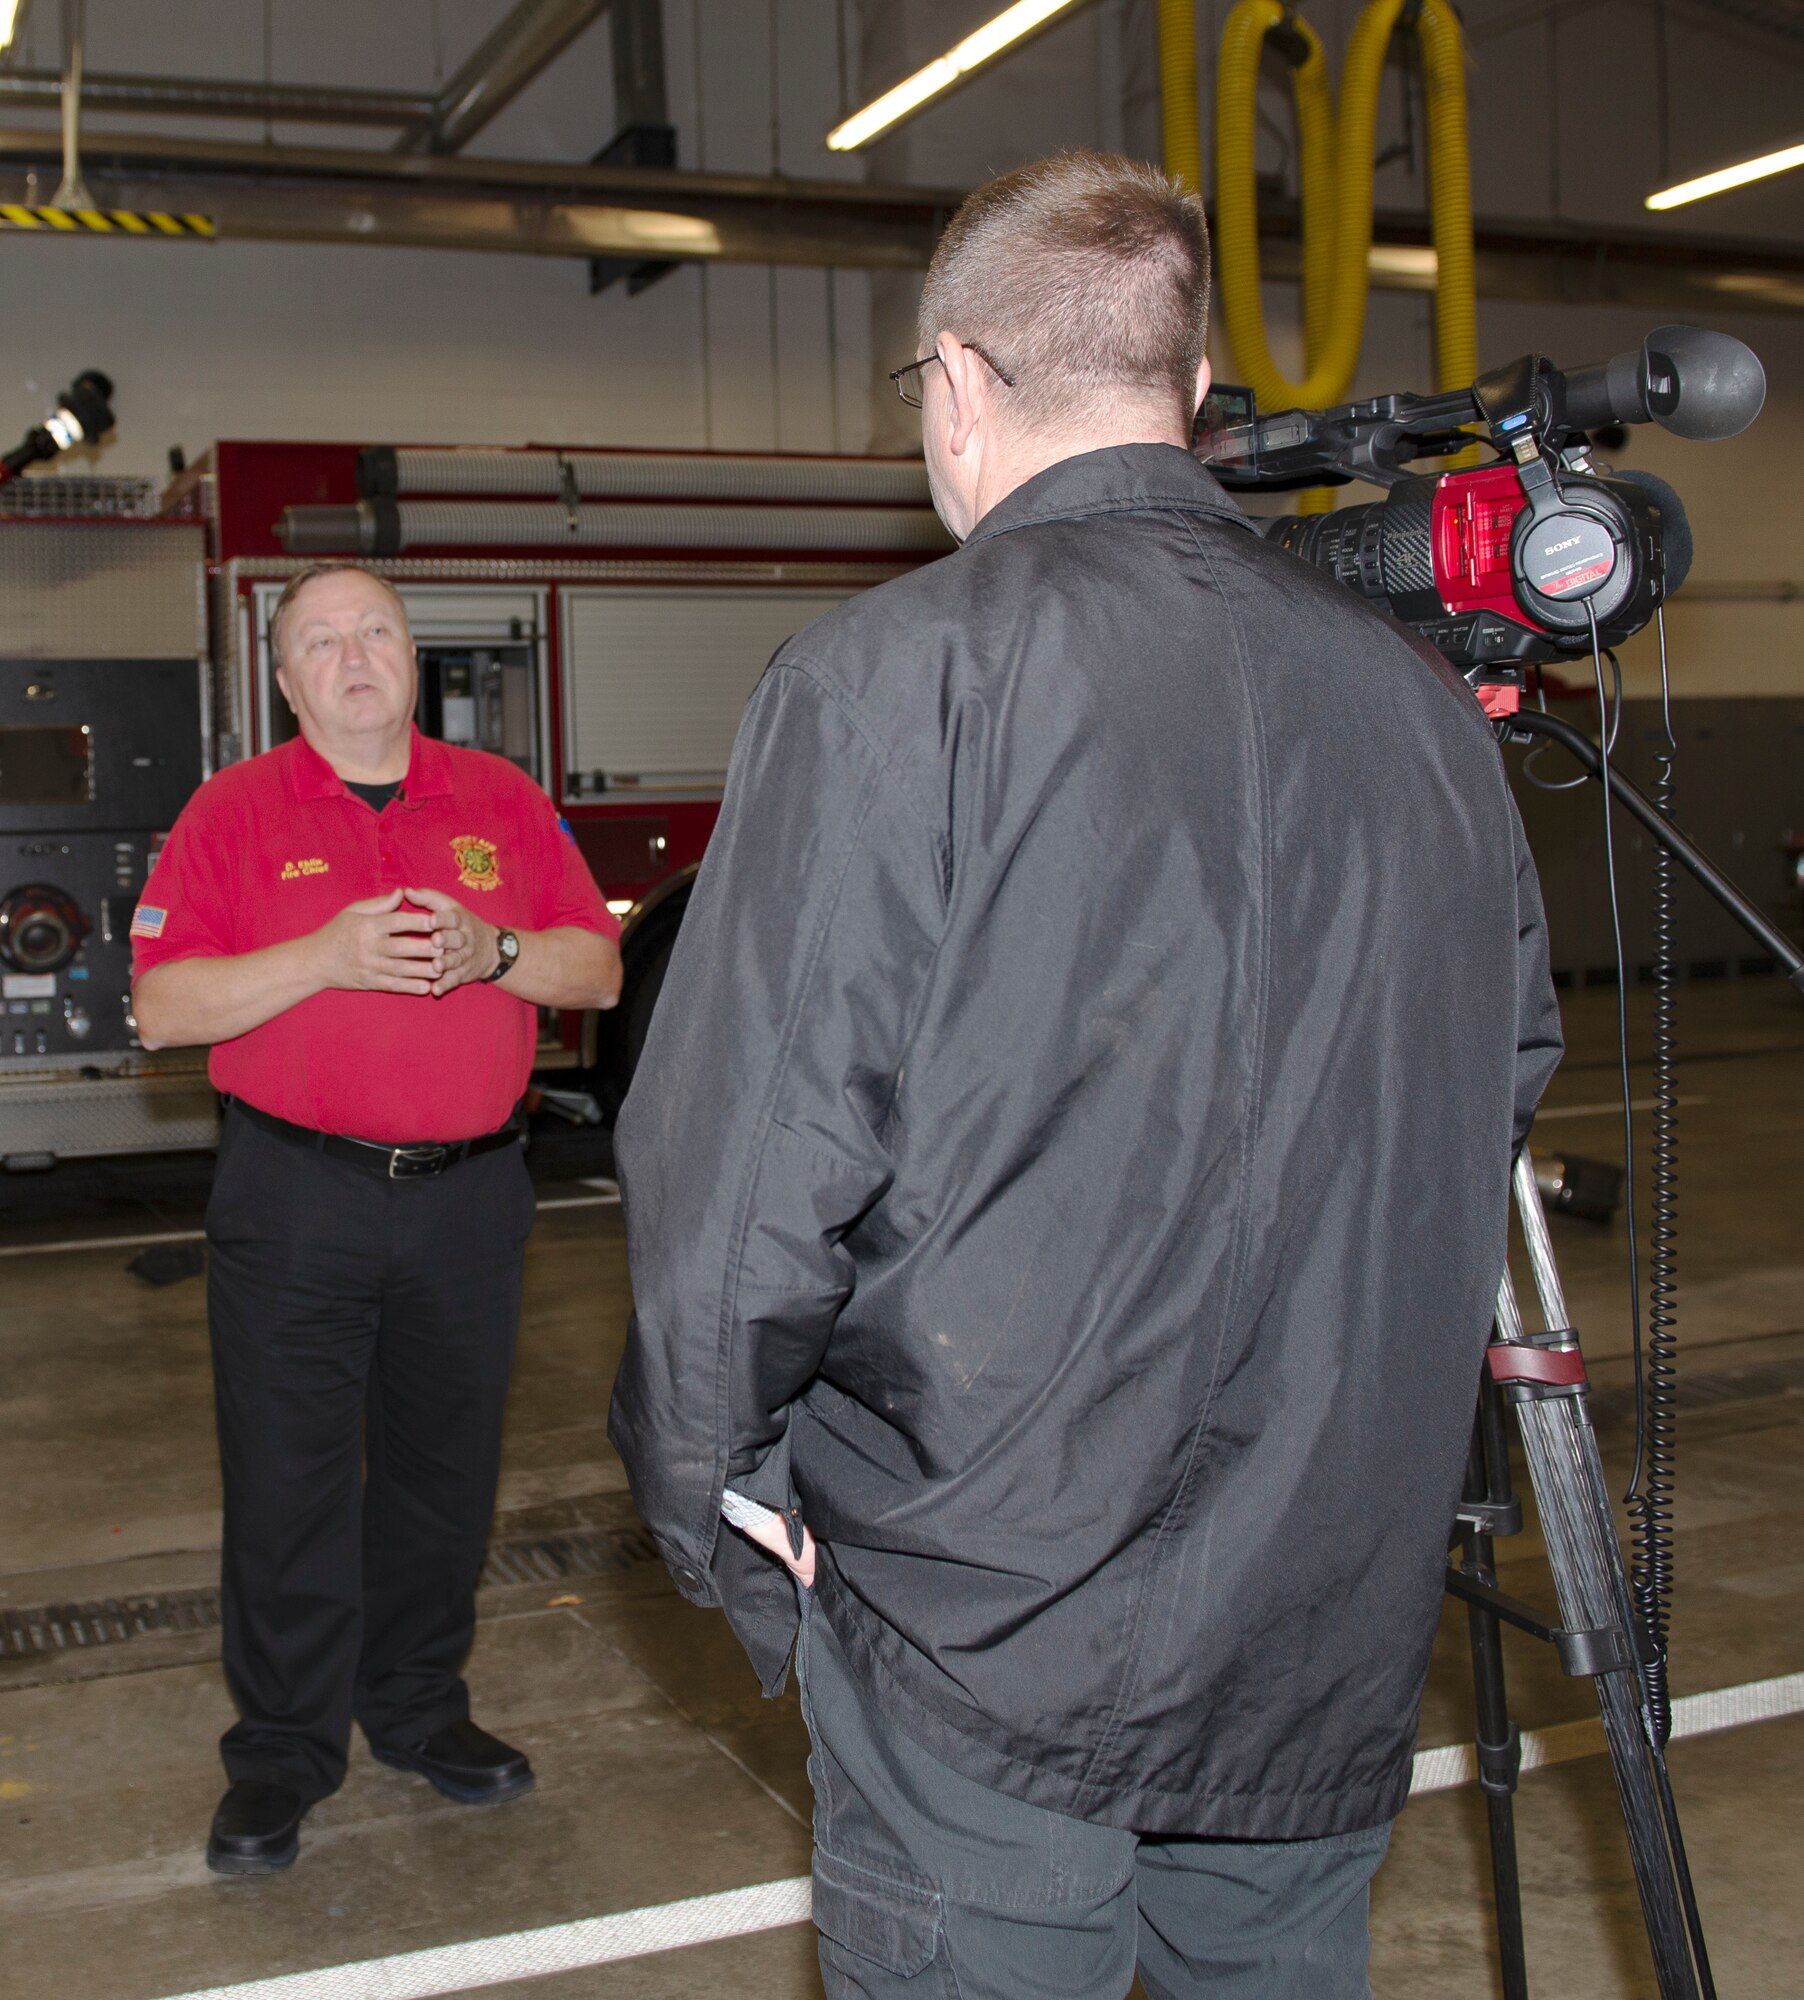 Fire Chief David Eblin, Offutt Air Force Base Fire Department, answers questions during an interview Oct. 7, 2019, at Bellevue Fire Department District 4 Bellevue, Nebraska. The city of Bellevue and its fire department offered their fire station at District 4, which had the available space for Station 2 crew members. This allowed Offutt AFB Station 2 firefighters the ability to provide reasonable response times to their area of responsibility, which includes three schools and other government structures. The renovation began earlier this year and is scheduled to be completed in March 2020.